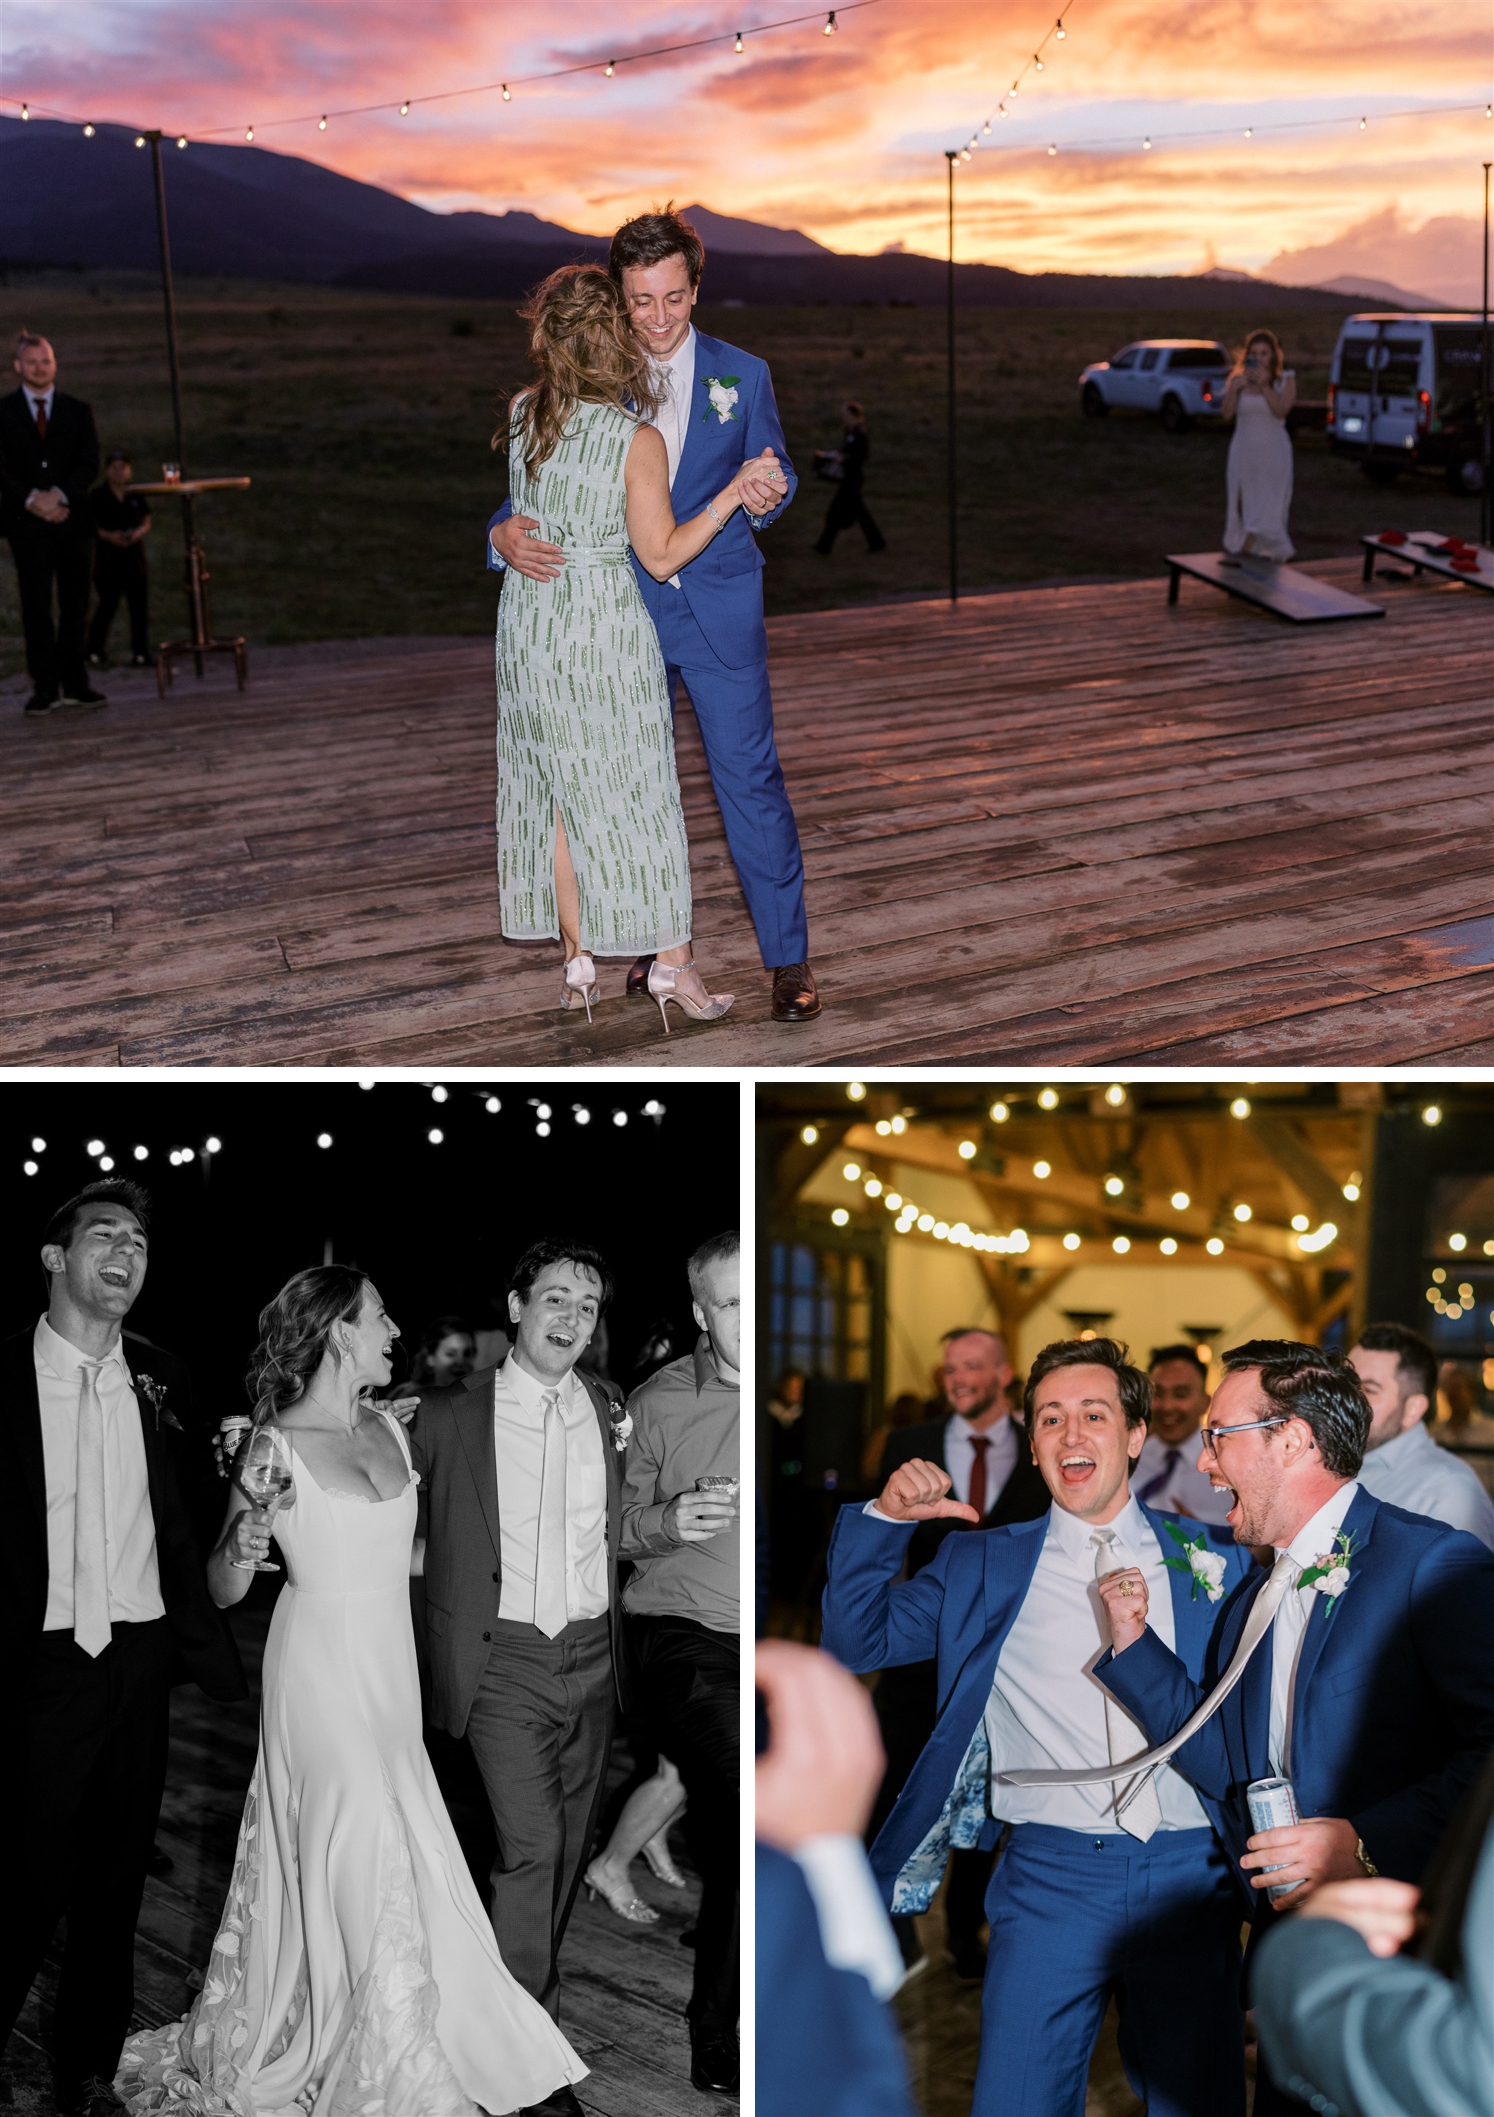 Dancing under sunset at Three Peaks Ranch | Bride and groom dancing with guests | groom dancing with friends | McArthur Weddings and Events
